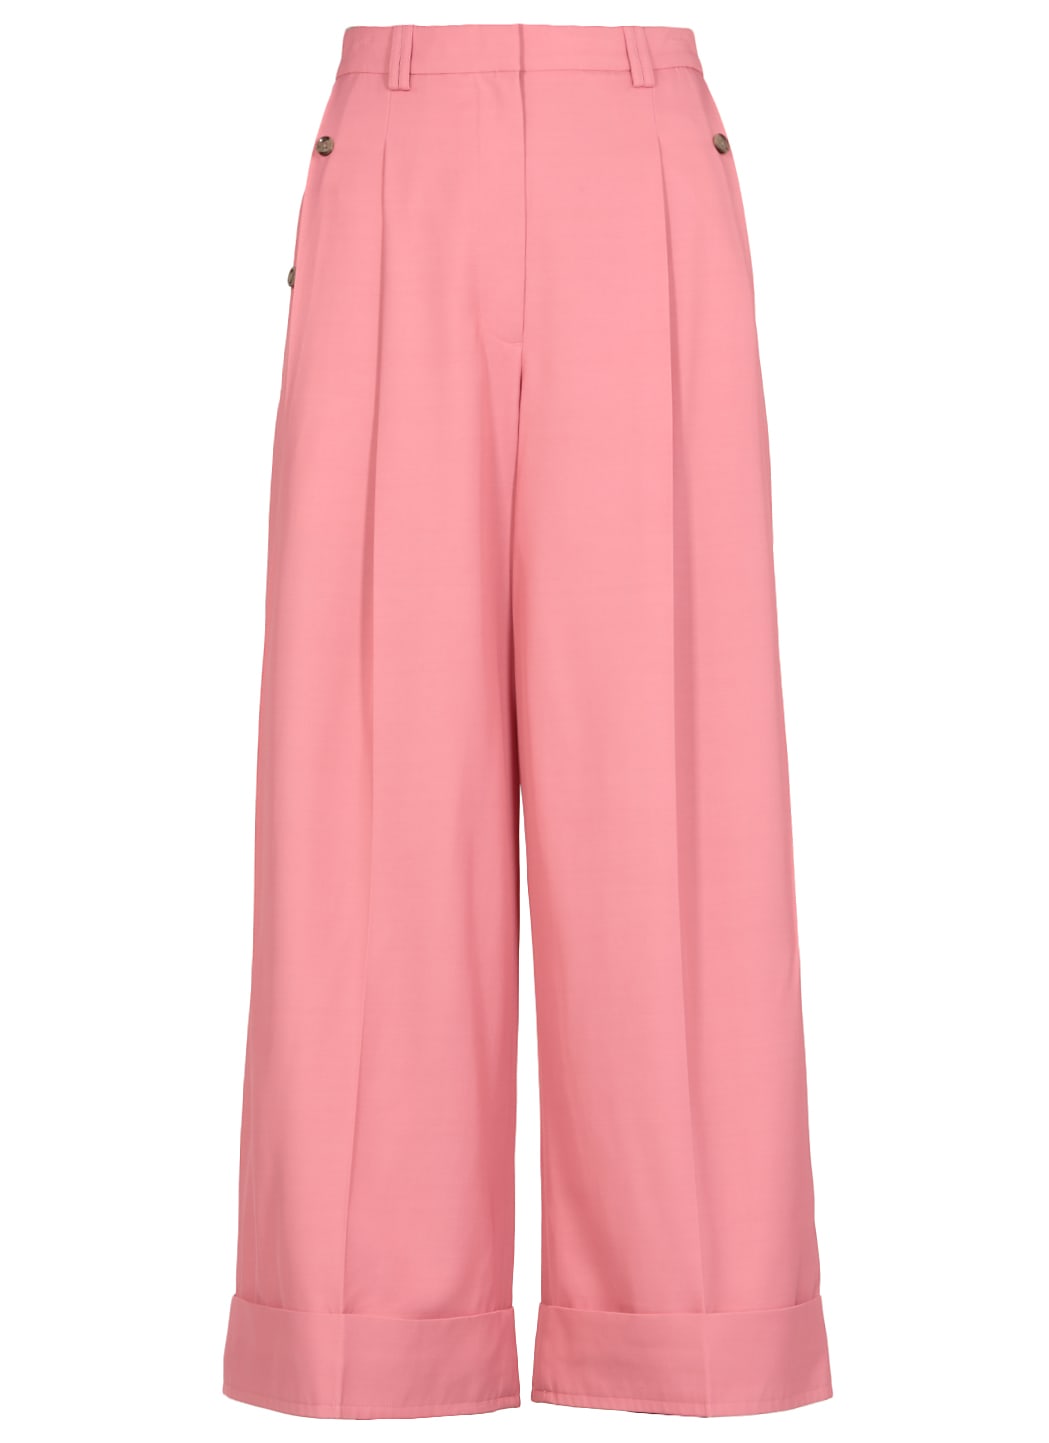 3.1 Phillip Lim Flared And Cuffed Trouser